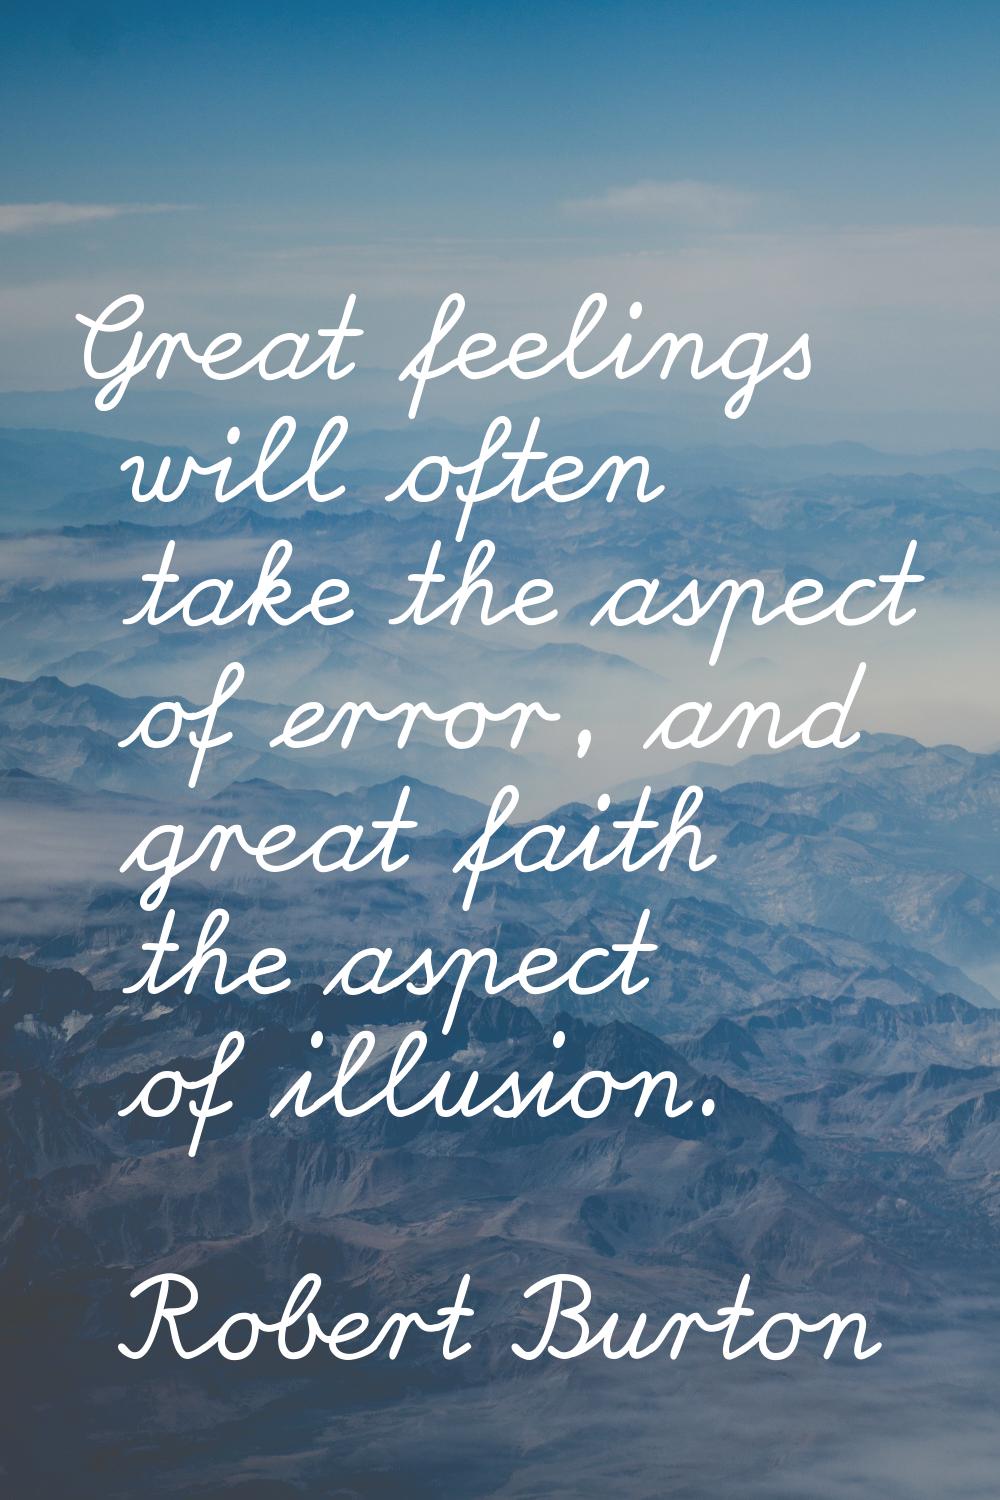 Great feelings will often take the aspect of error, and great faith the aspect of illusion.